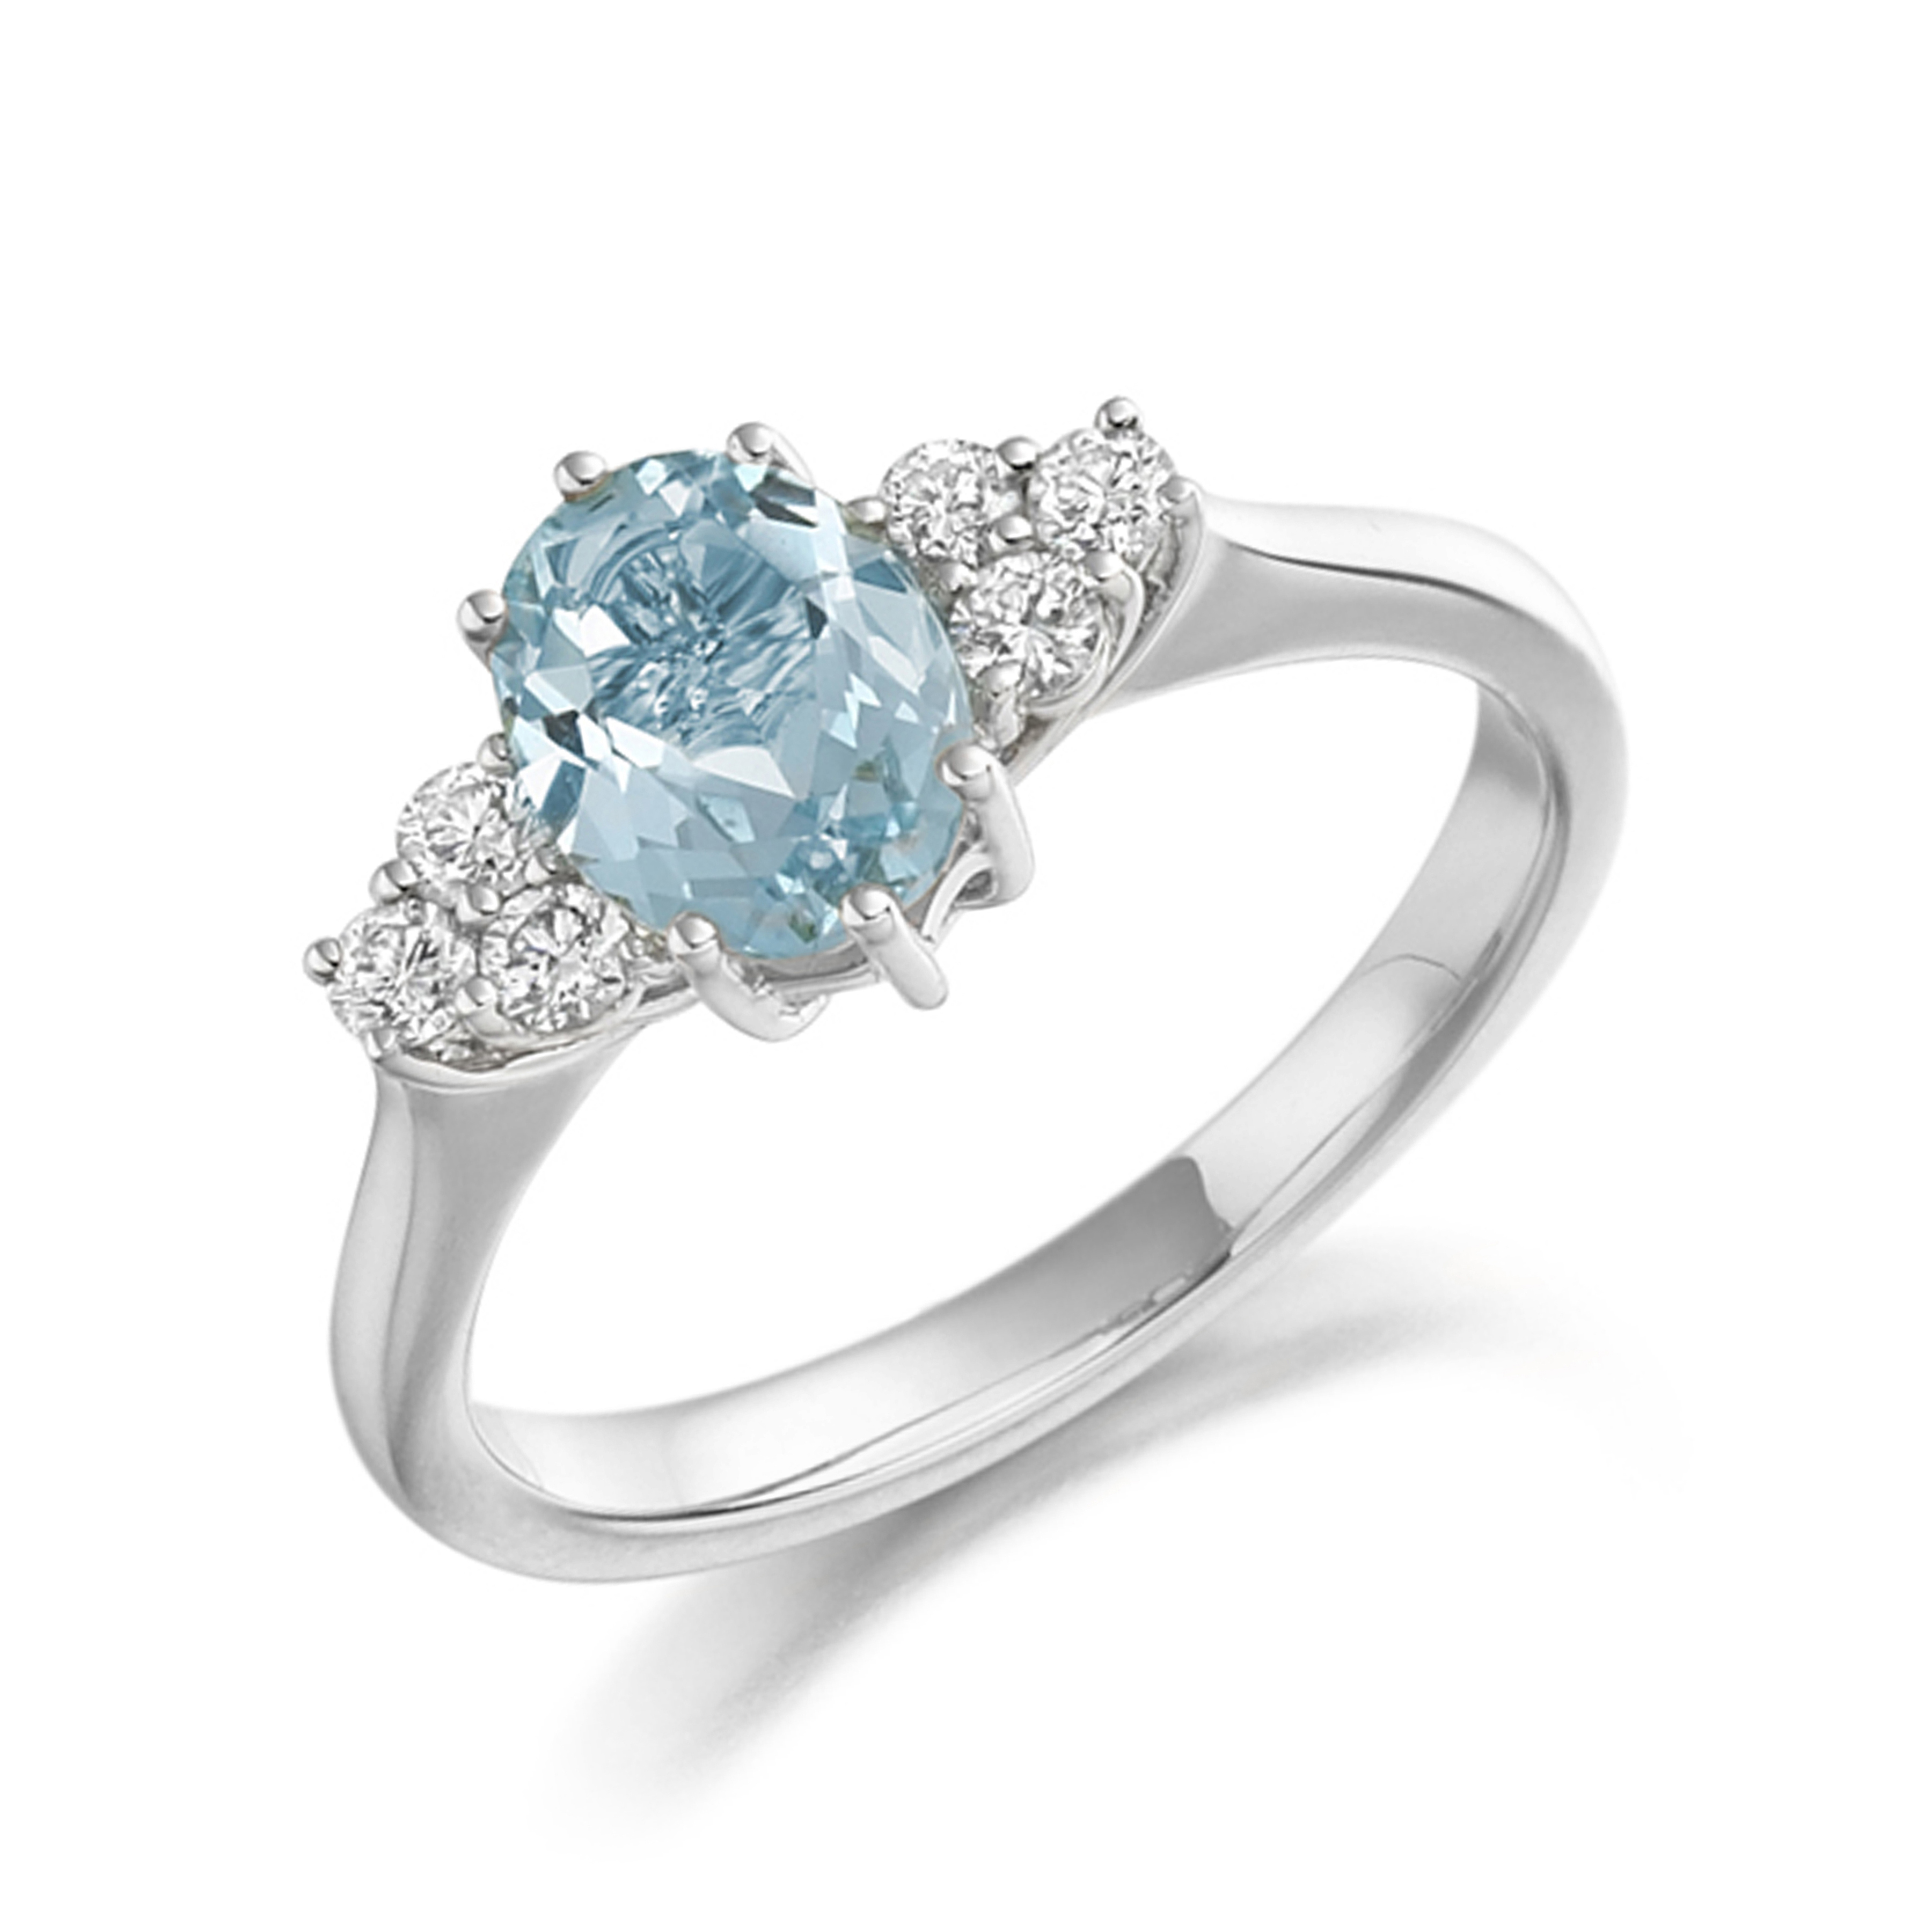 4mm Oval Blue Topaz Trilogy Diamond And Gemstone Engagement Ring